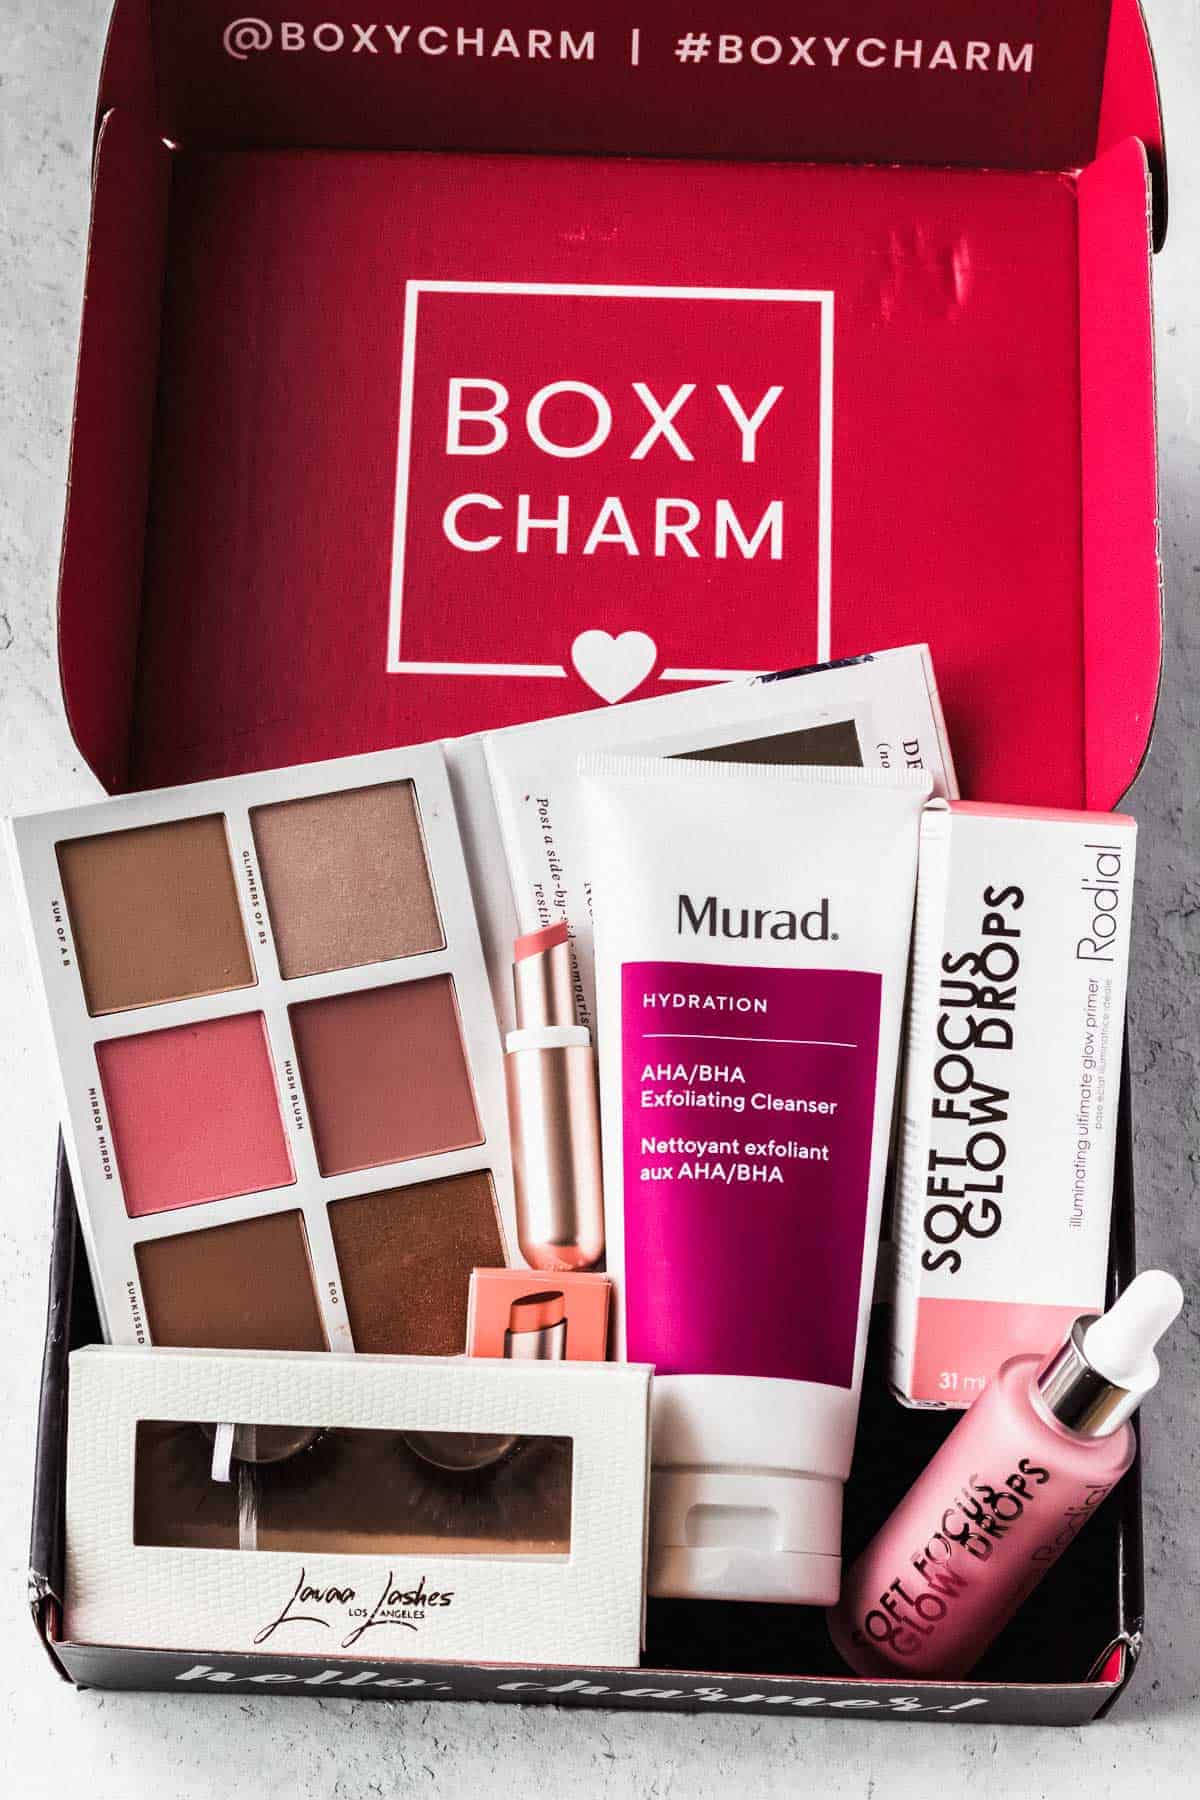 Opened October 2020 Boxycharm base box with all of the items displayed inside.